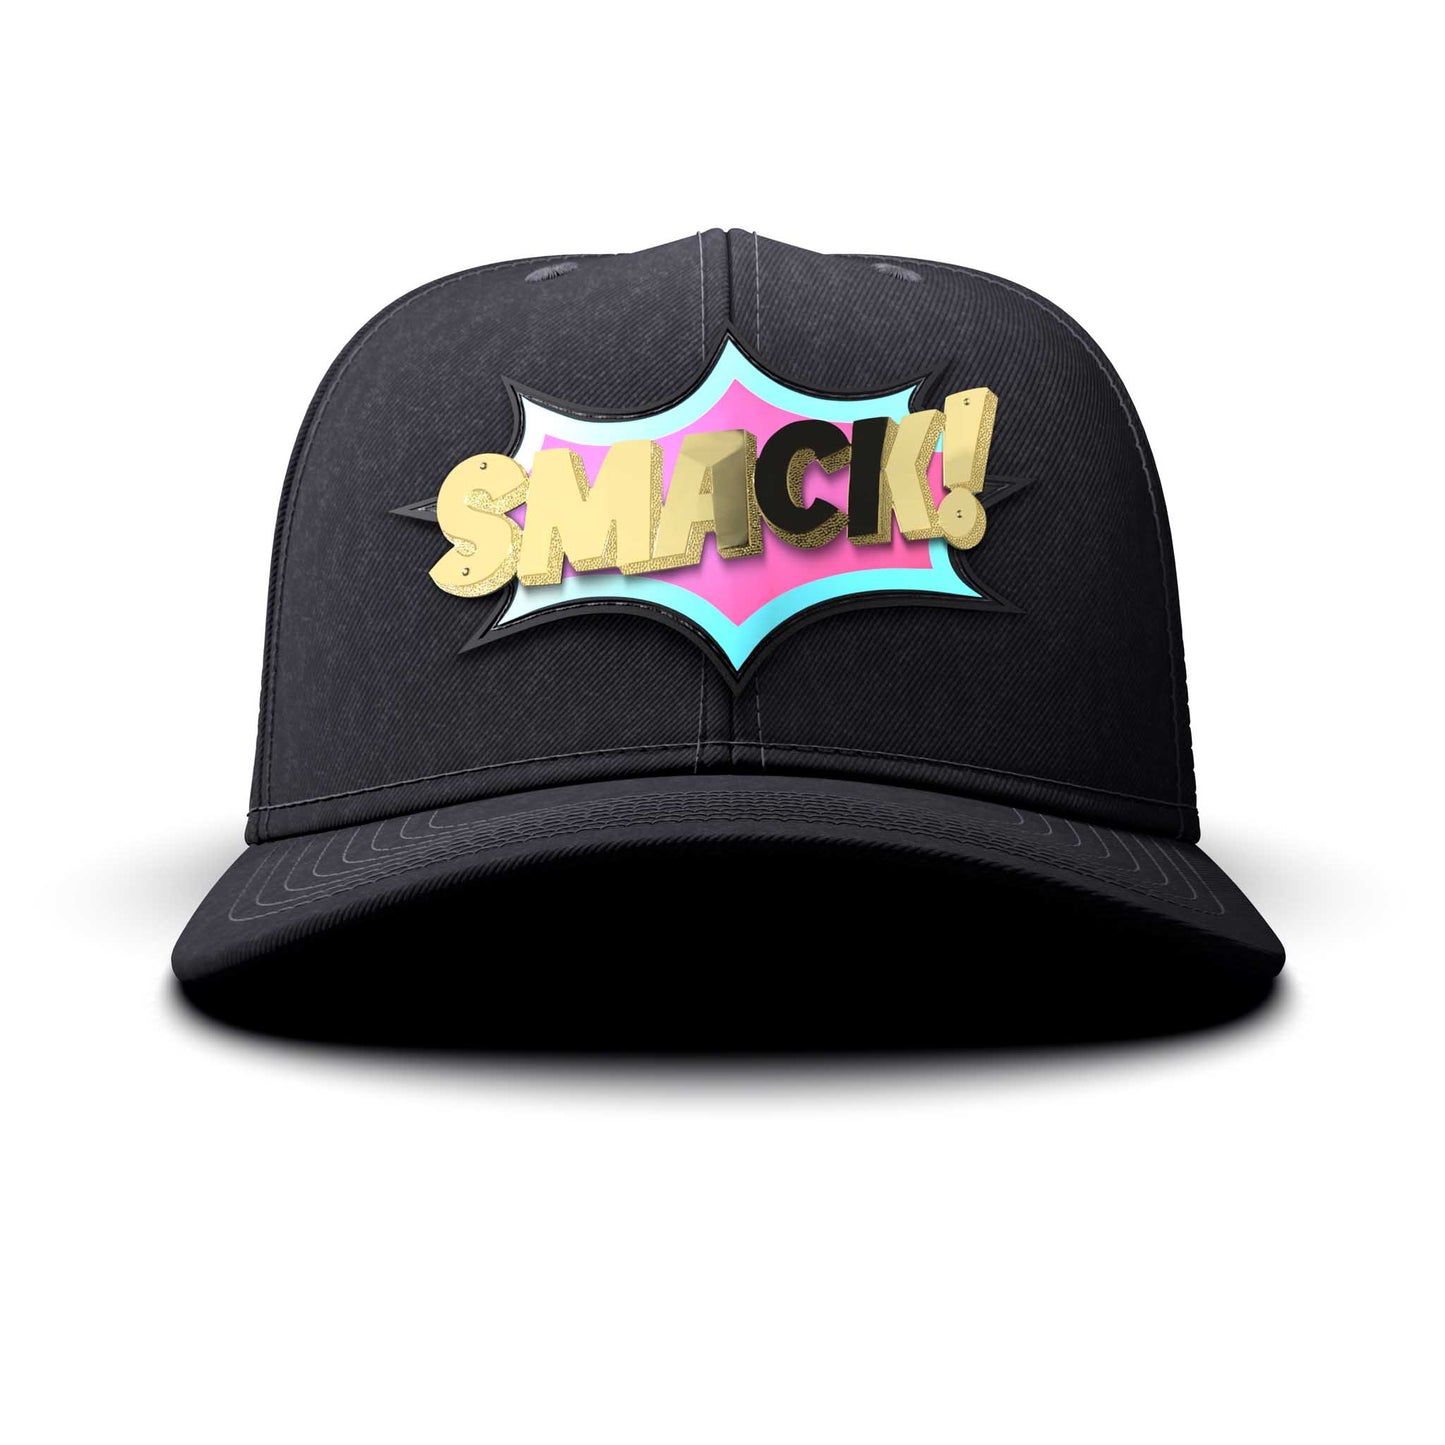 SMACK! - Gold Letters & Patch, curved